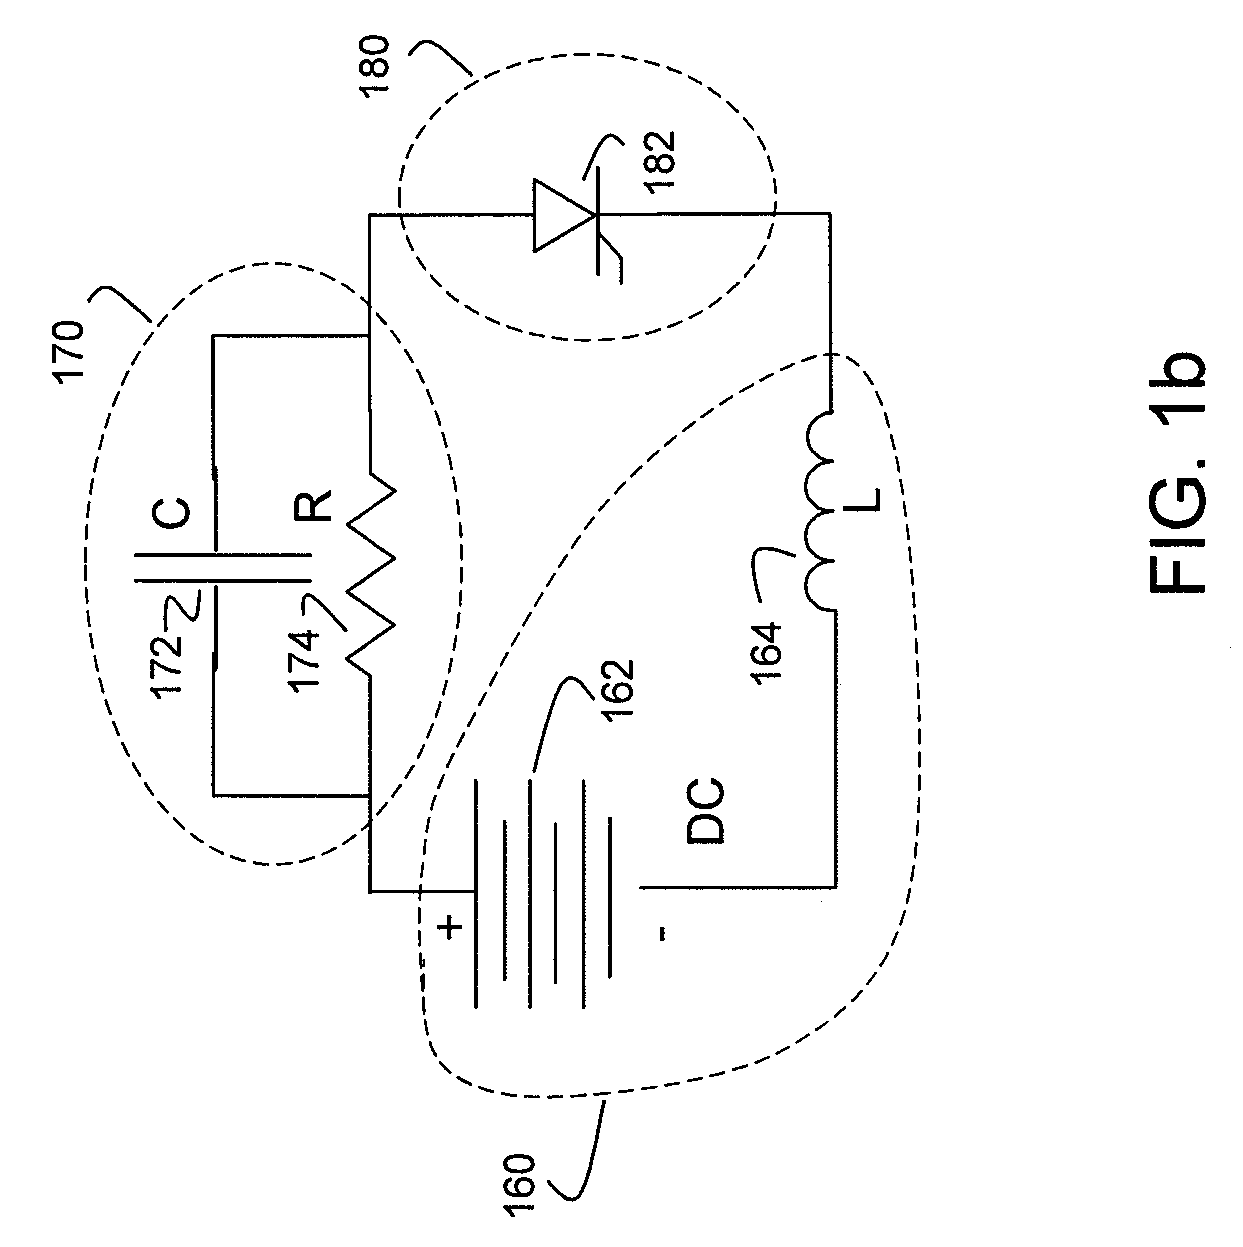 Methods and apparatus for dimming light sources